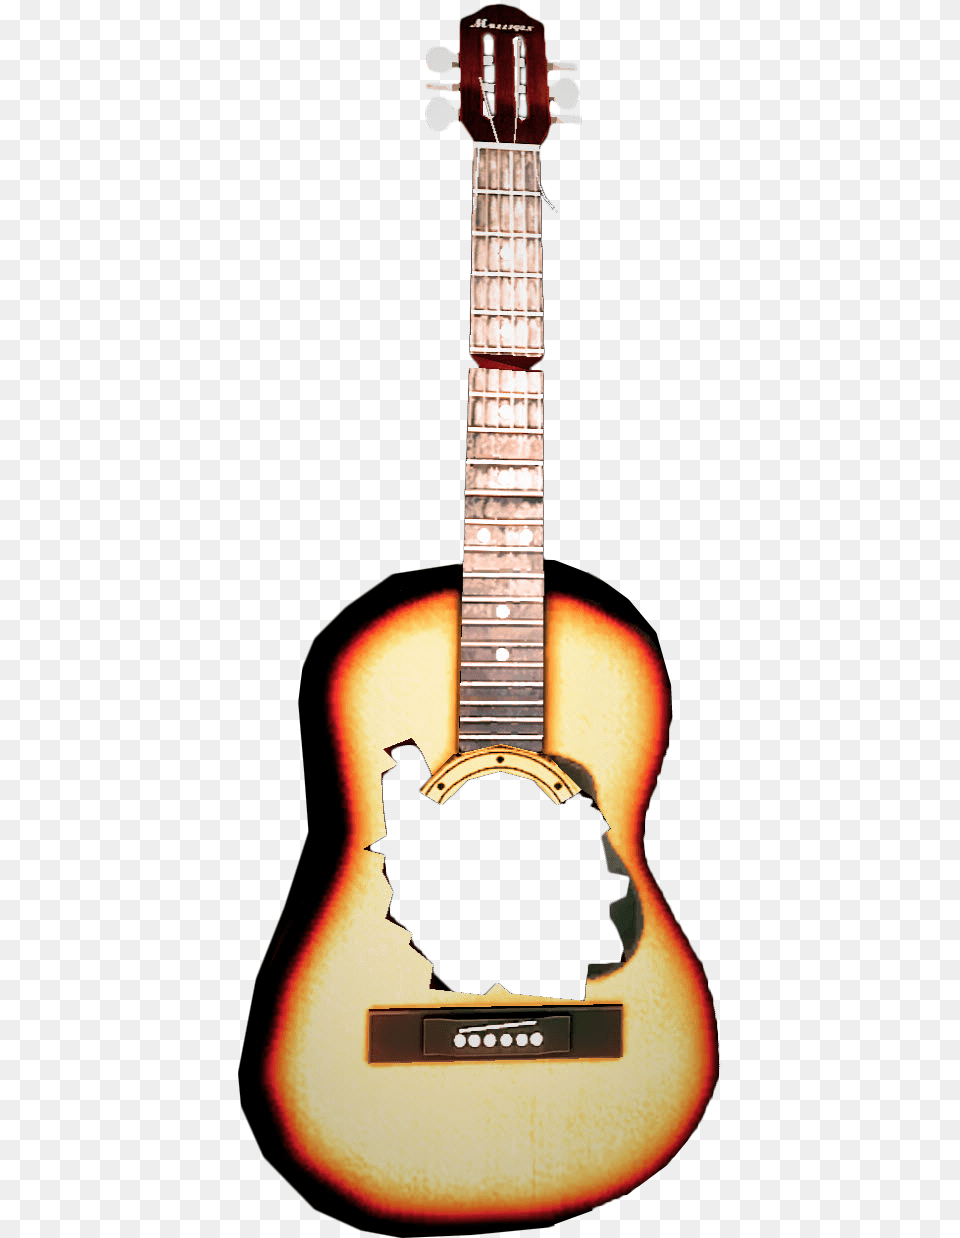 Acoustic Guitar Clipart Full Hd, Musical Instrument Png